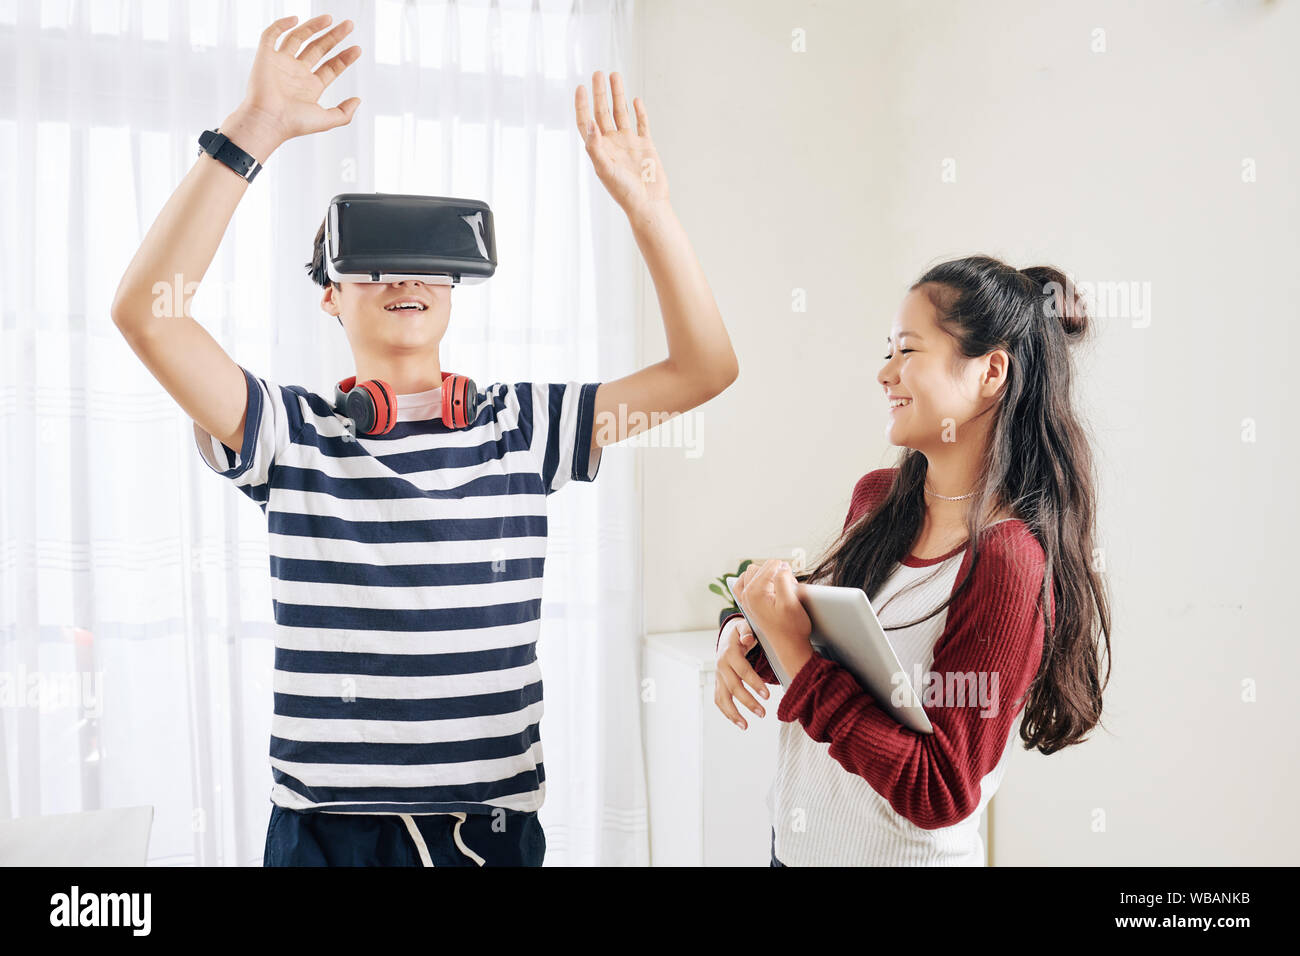 Smiling mixed race teenage girl looking at her brother playing video game in virual reality headset Stock Photo